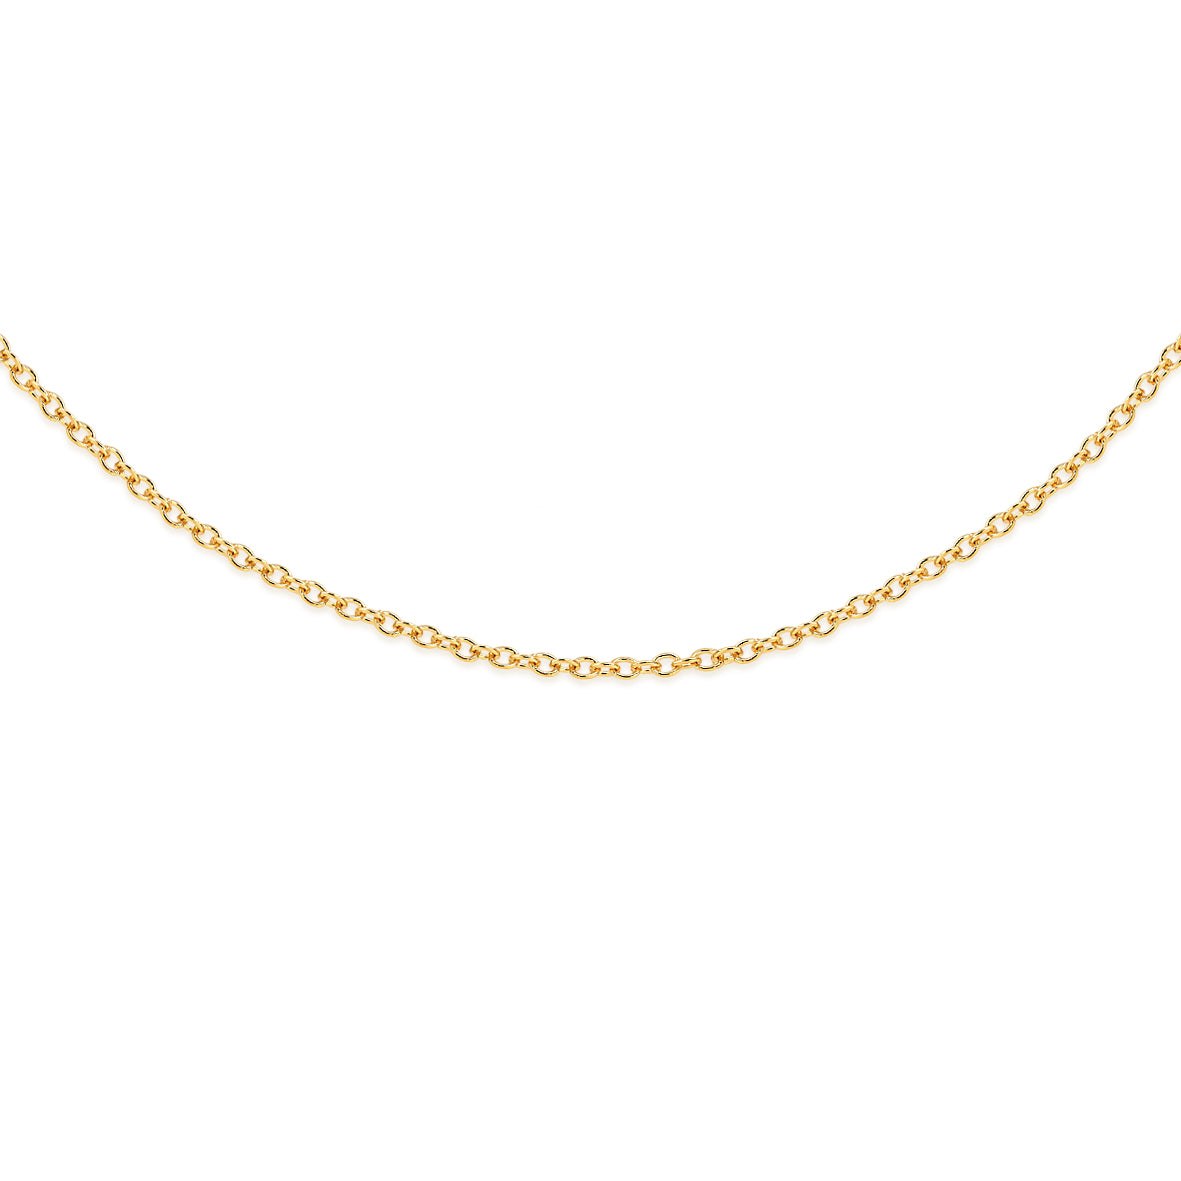 9ct gold cable chain